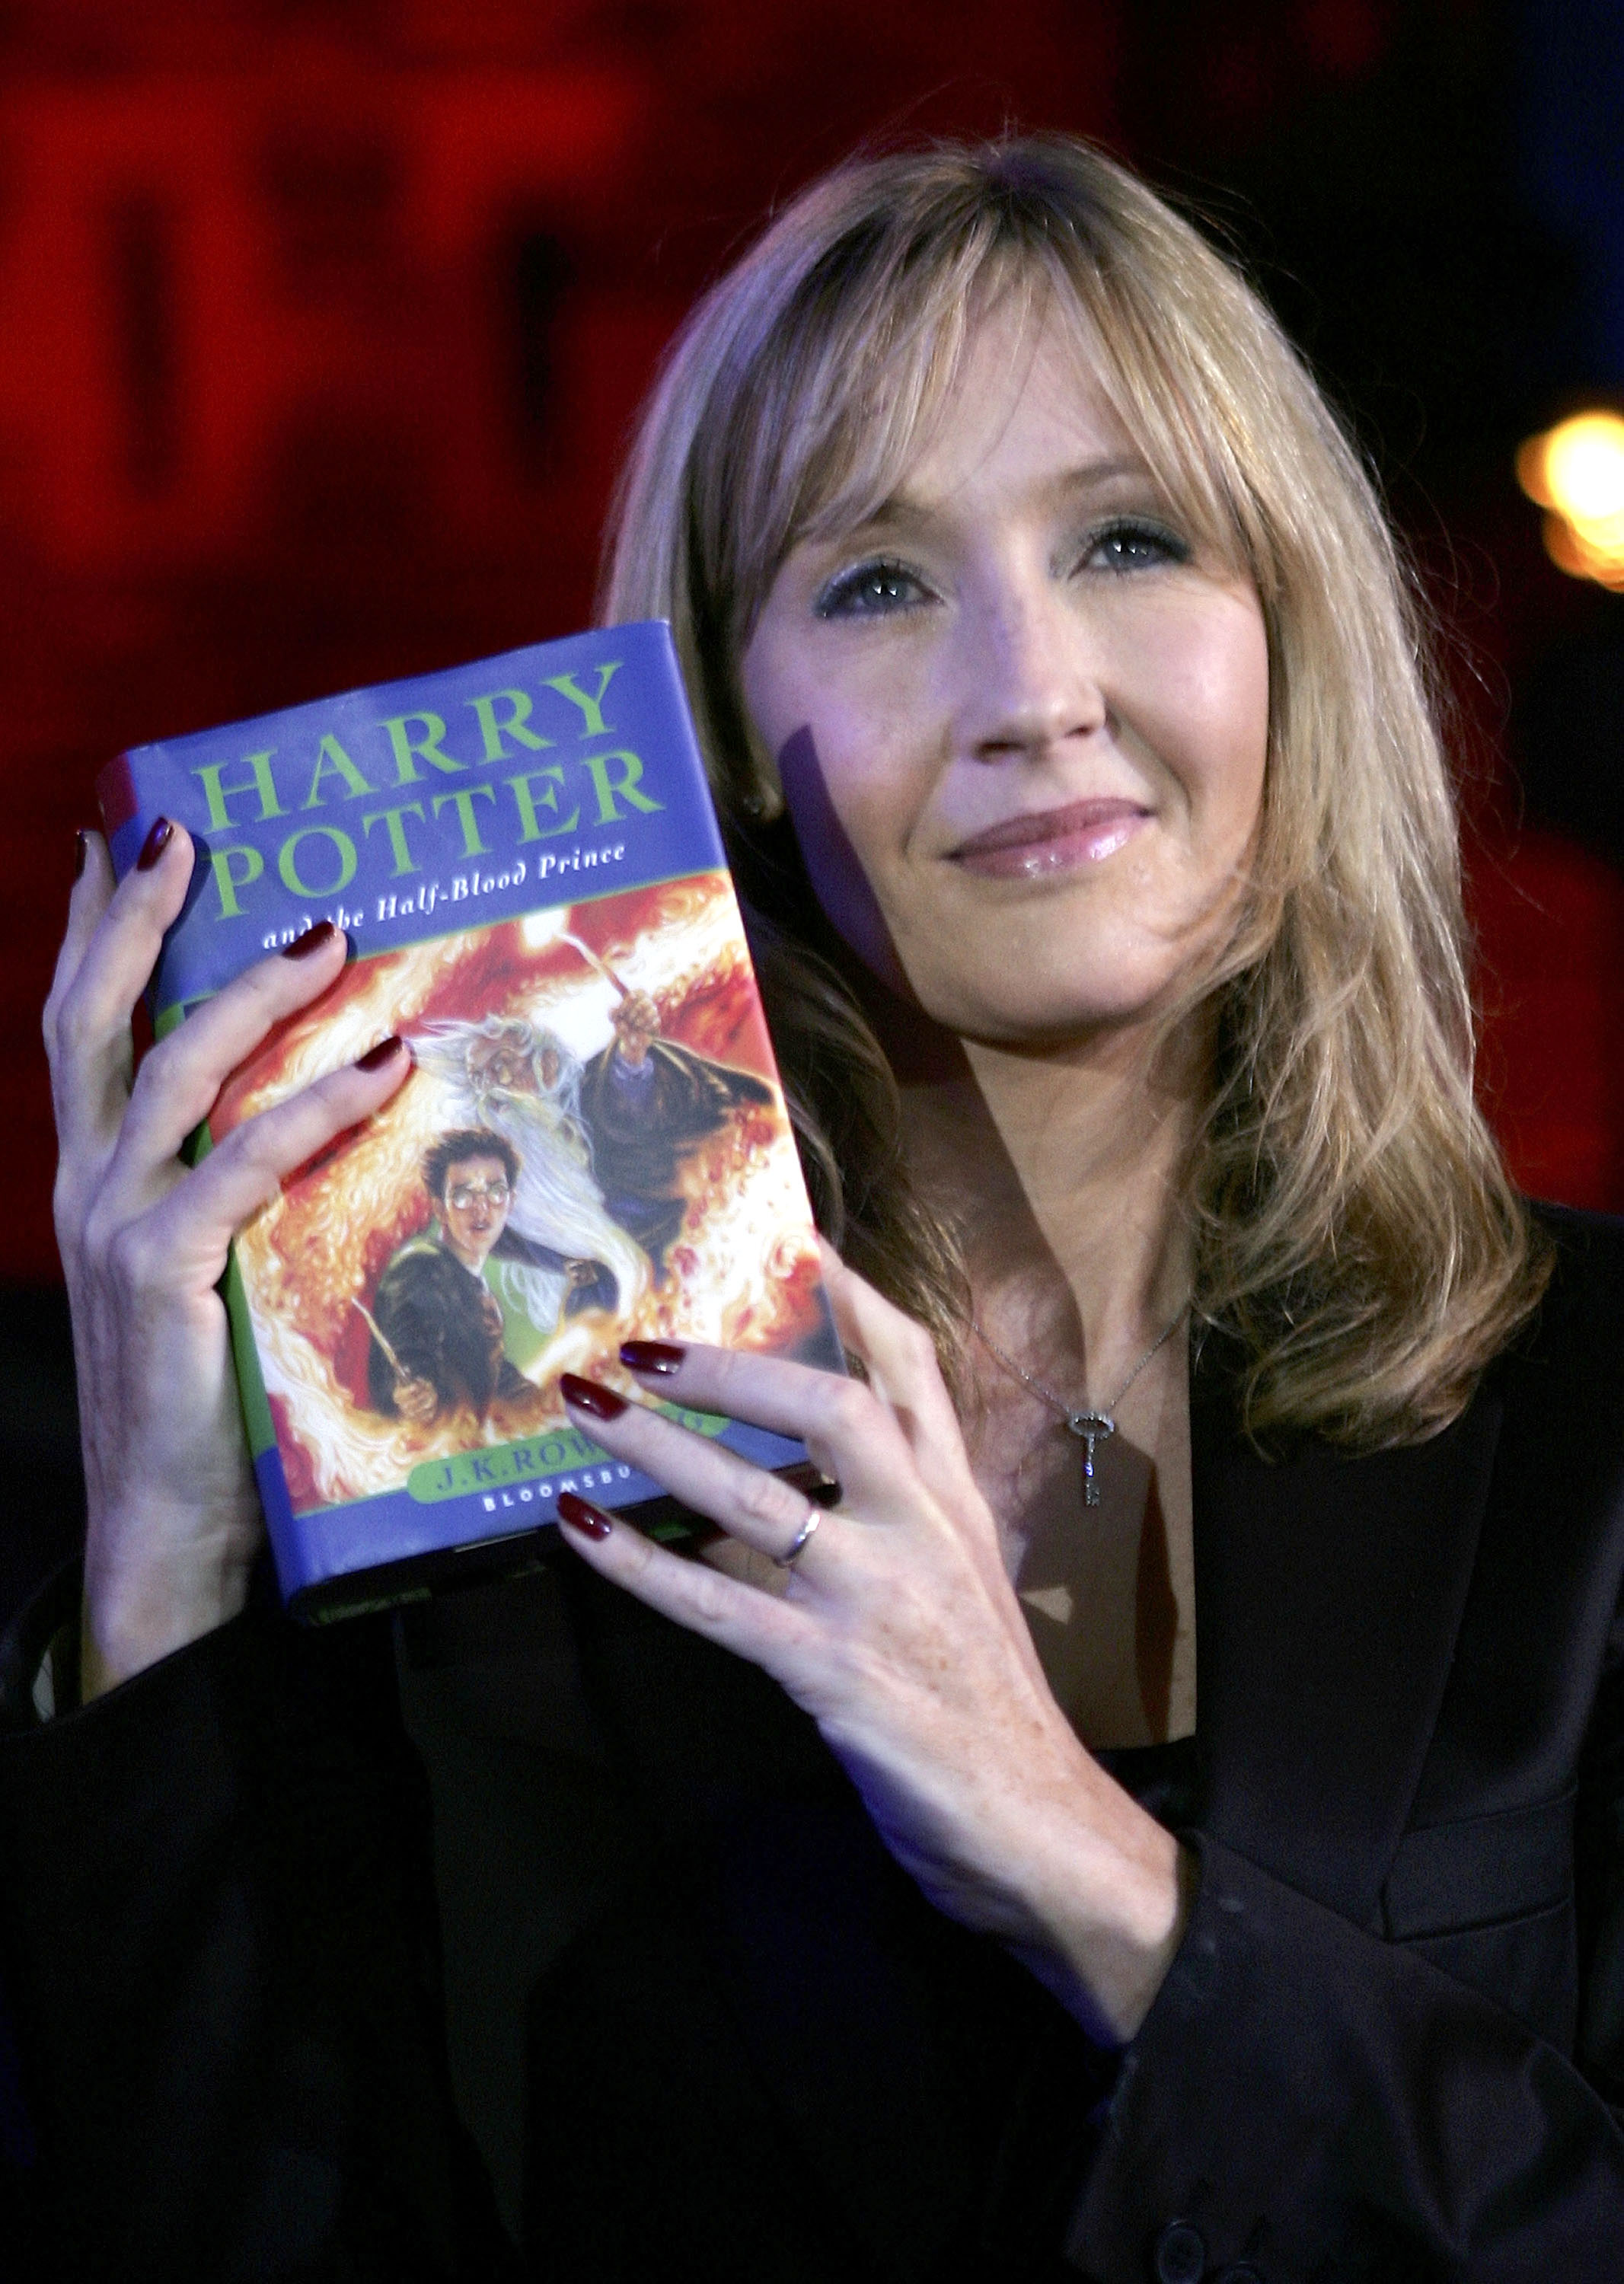 JK Rowling holding a Harry Potter book